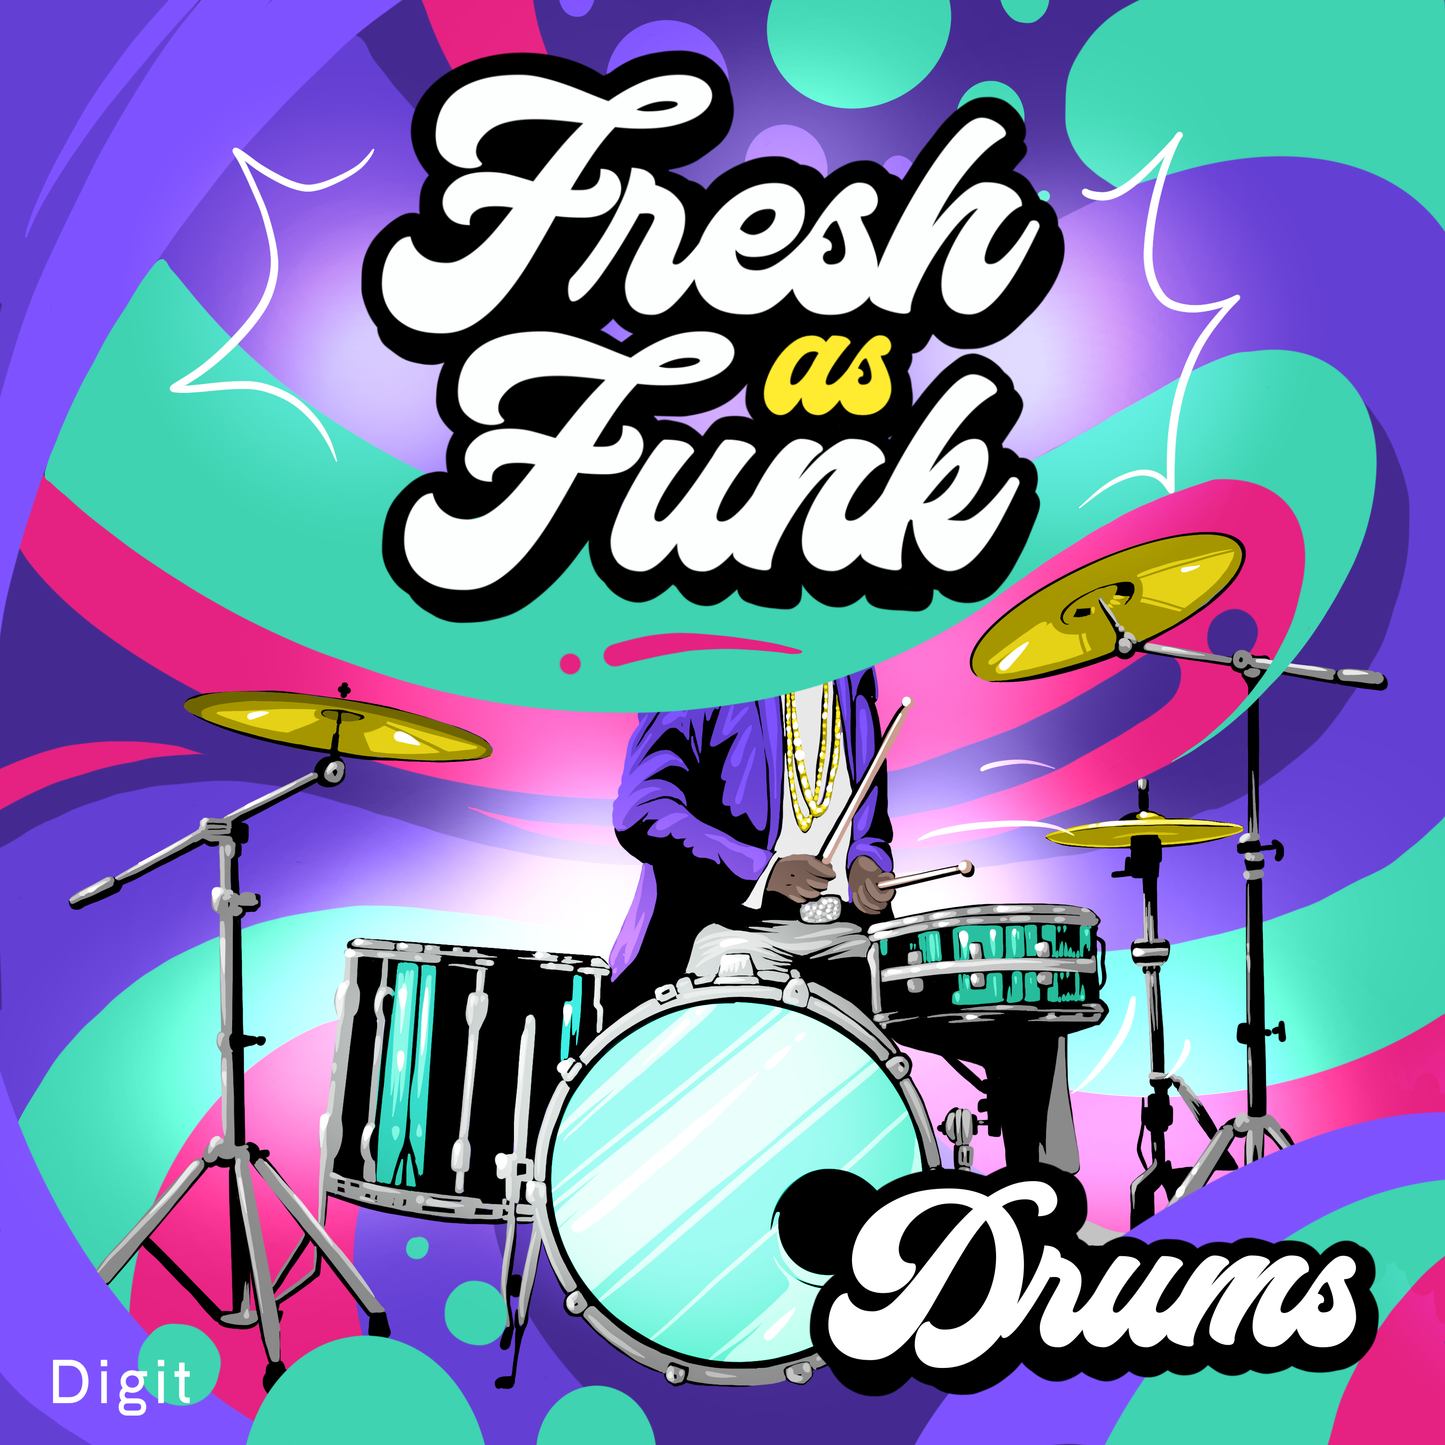 A cartoon of a man in a purple jacket playing drums with a colourful 70s inspired background.